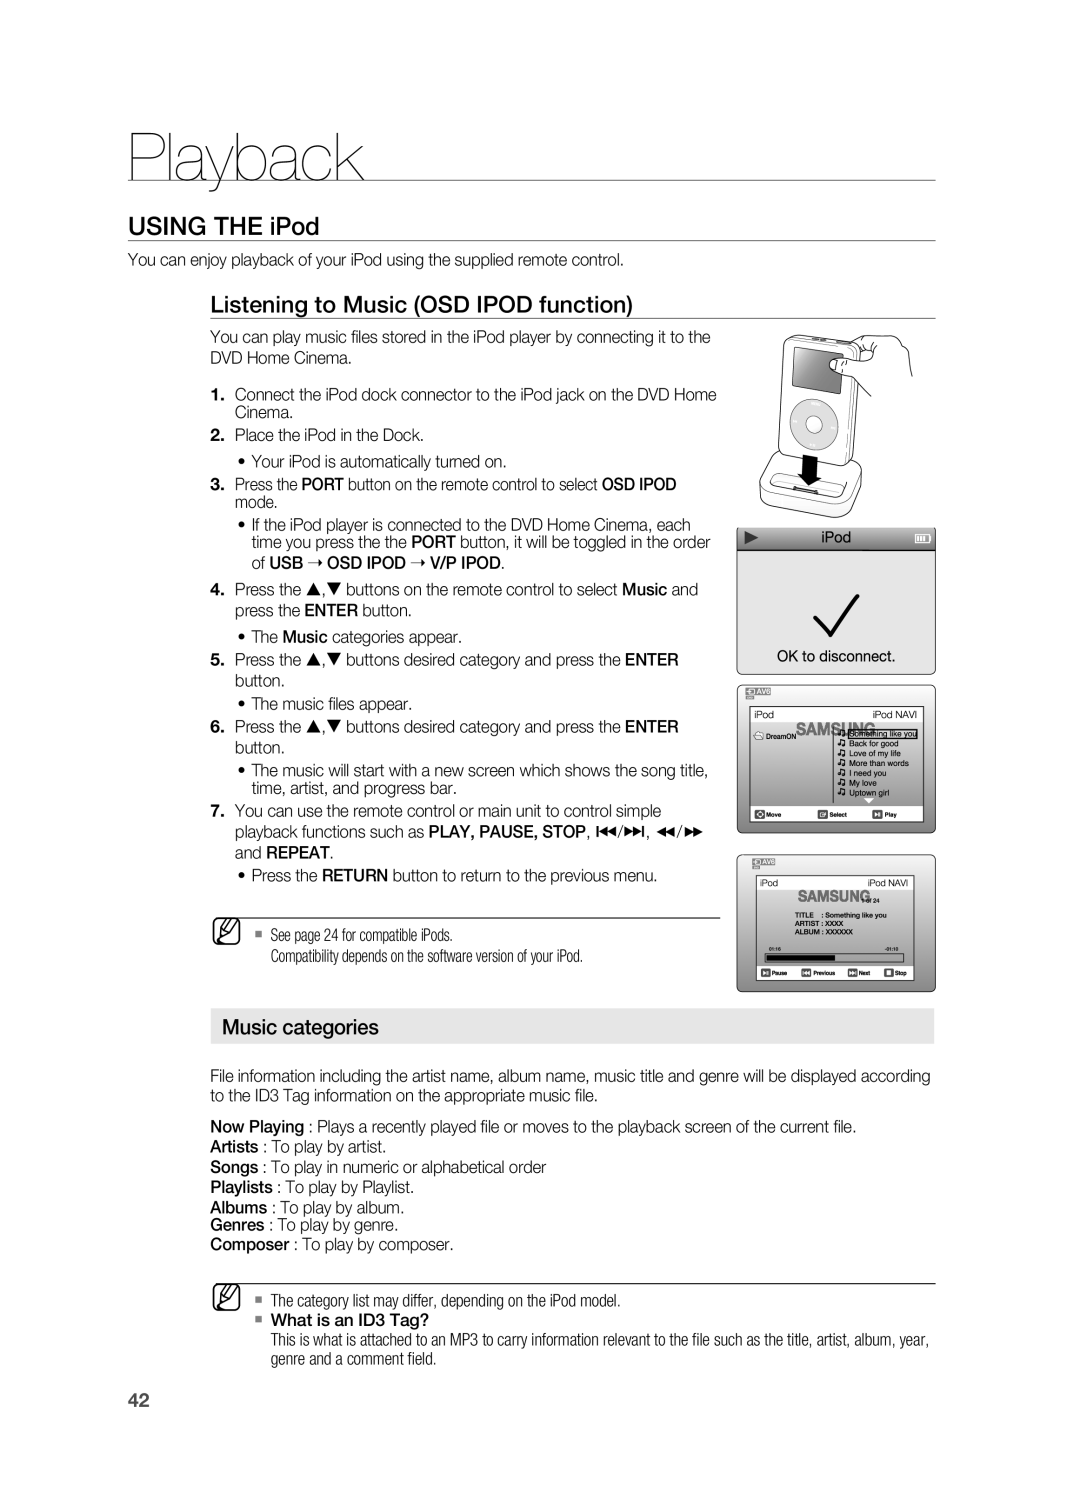 Samsung HT-TX725G, HT-X725G user manual USING THE iPod, Playback, Listening to Music OSD IPOD function, Music categories 